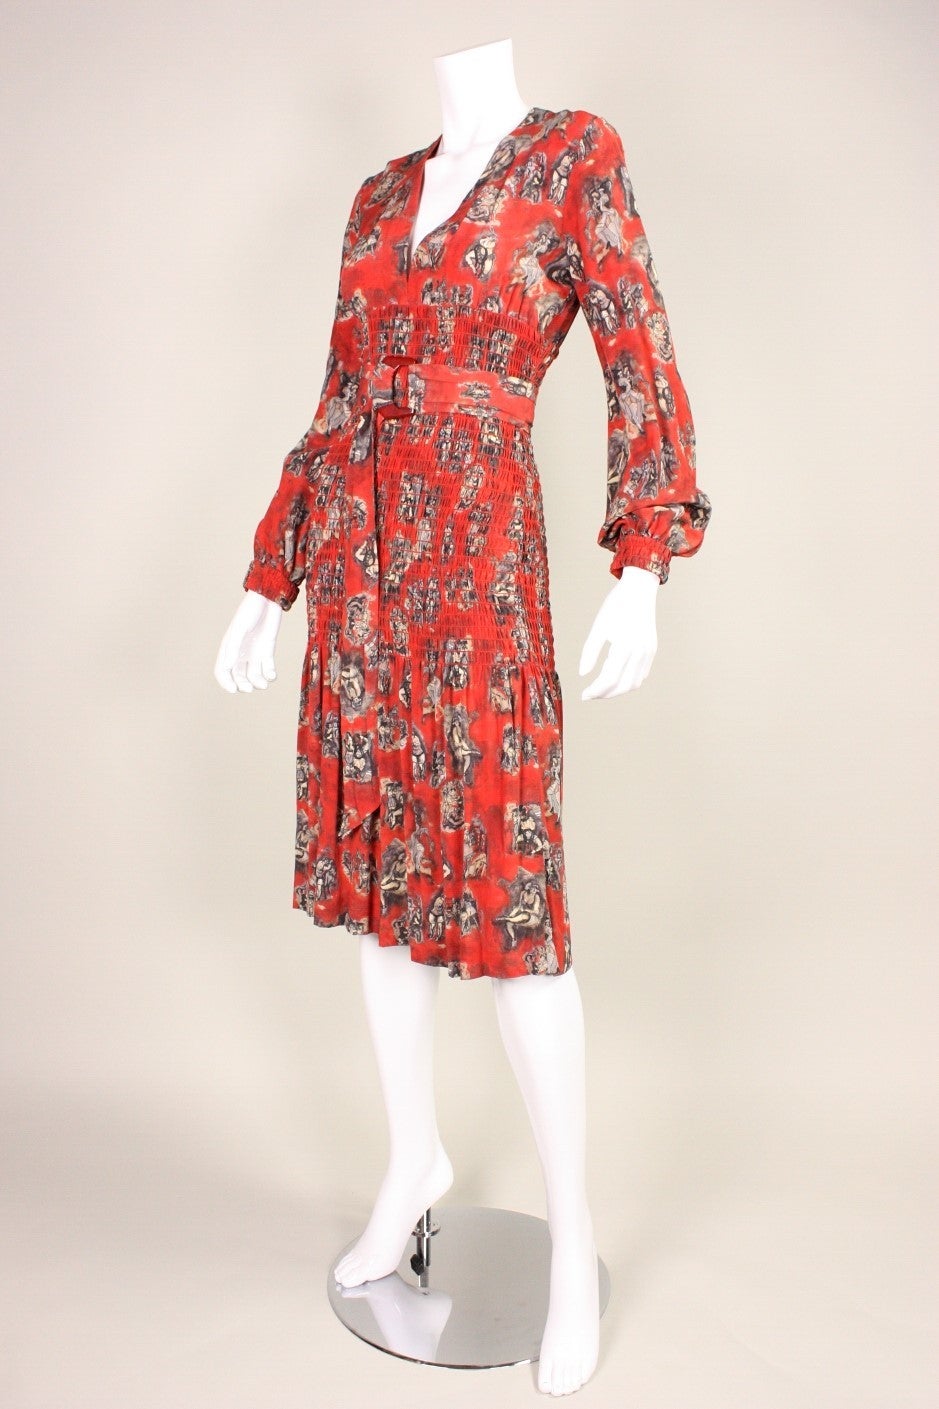 Cocktail dress from Jean Paul Gaultier is made of brick red silk with a print resembling the burlesque works of Toulouse Lautrec. Bodice has a deep v-neck. Ruched waist starts just below the bust and ends just beneath the buttocks.  Sleeve cuffs